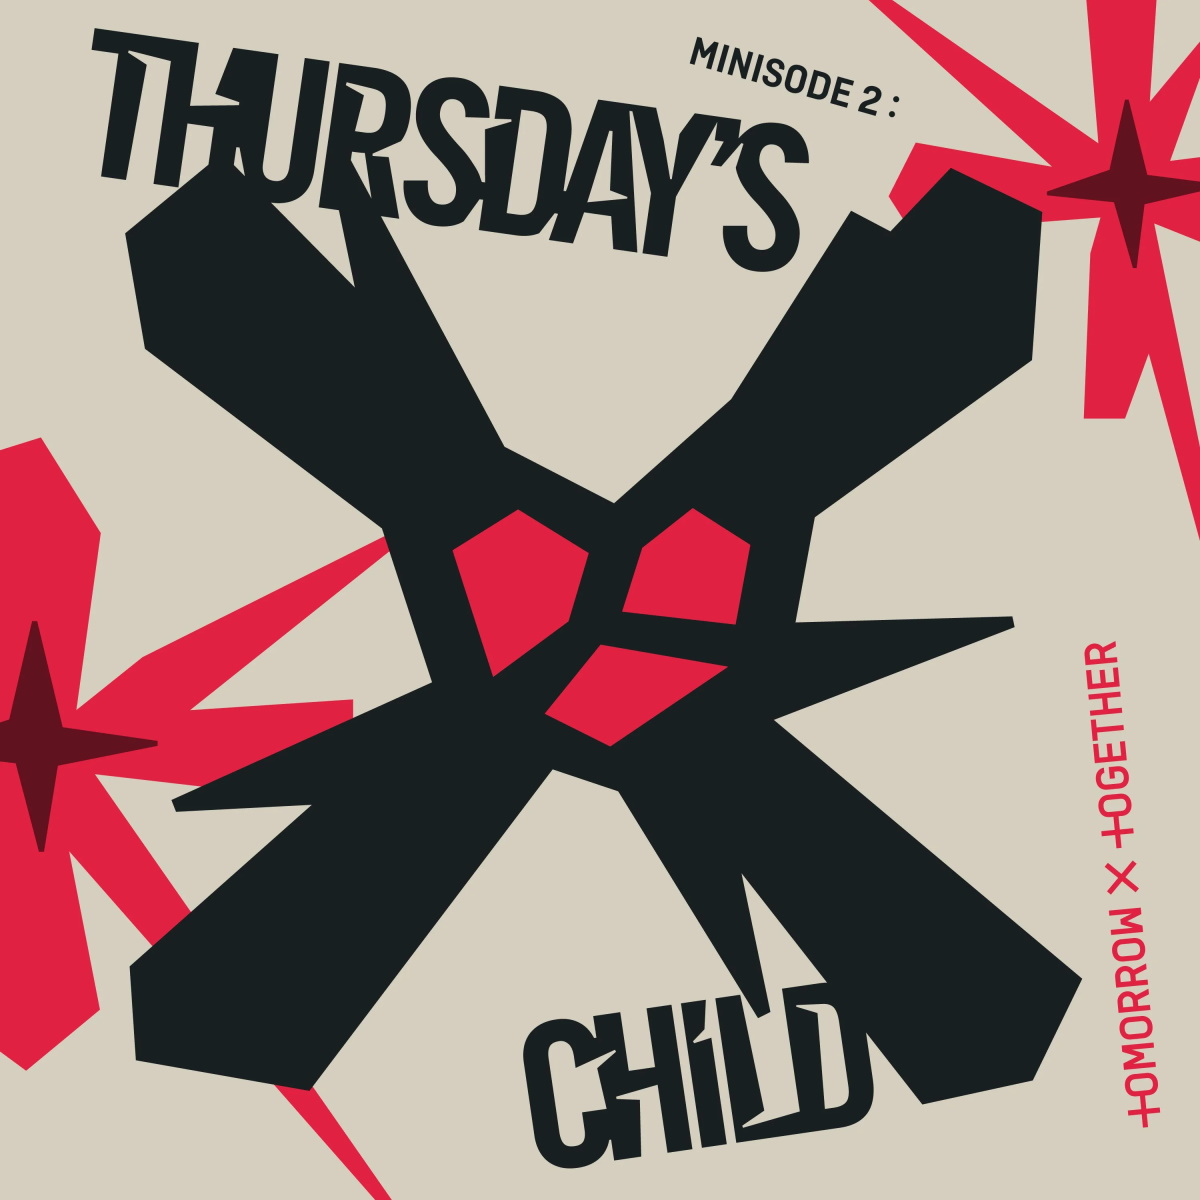 Cover for『TOMORROW X TOGETHER - Good Boy Gone Bad』from the release『minisode 2: Thursday’s Child』